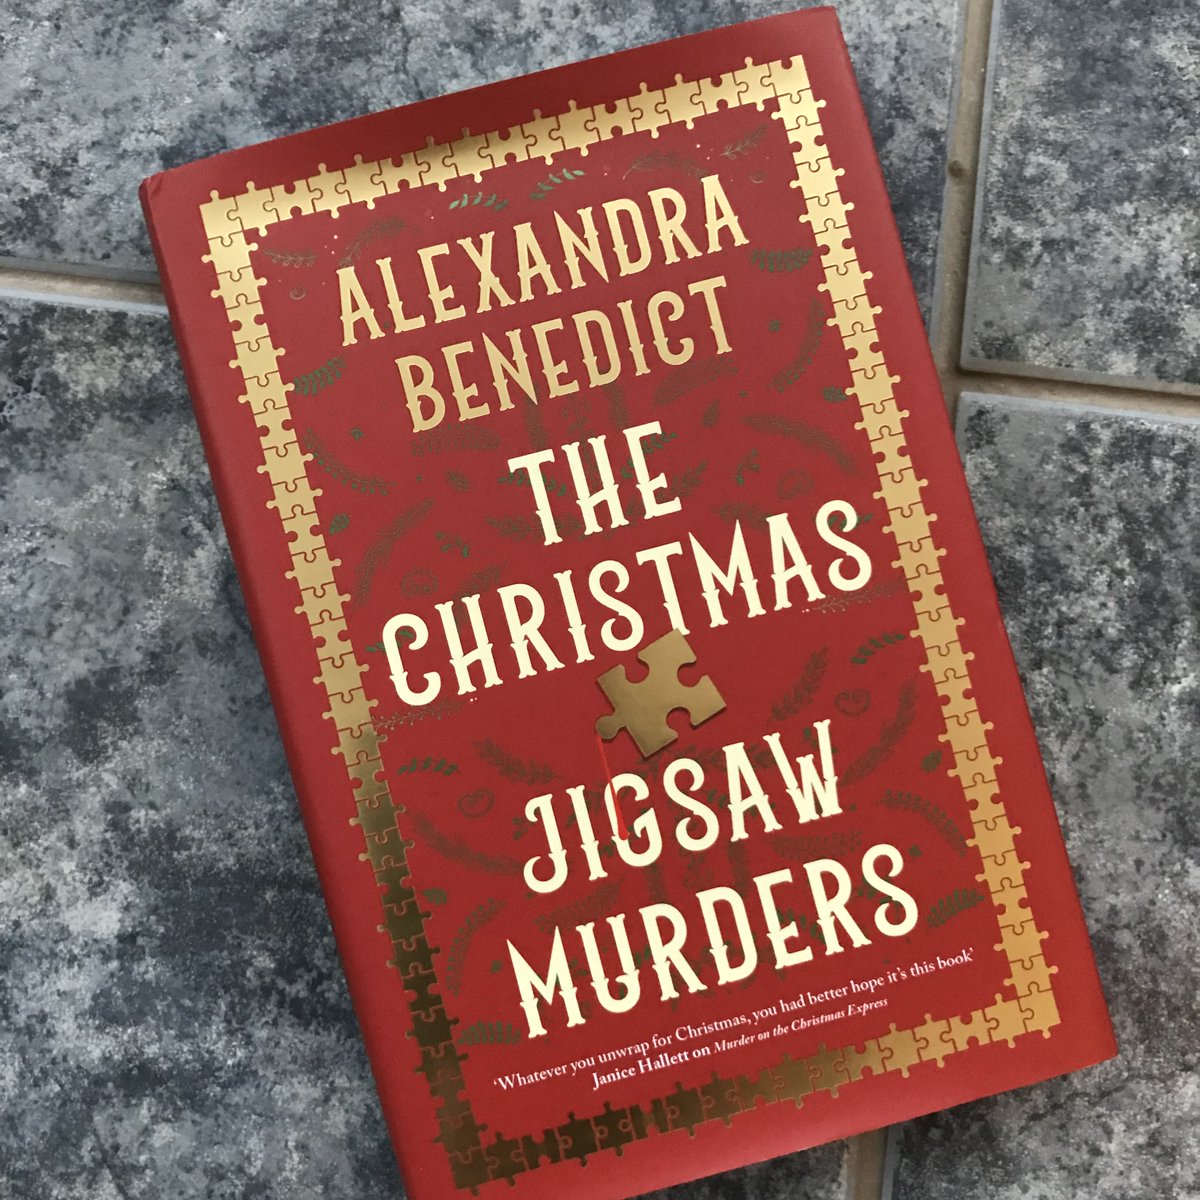 Our SATURDAY DRAW is live. #WIN The Christmas Jigsaw Murders by @ak_benedict facebook.com/CrimeFictionLo… Today only!